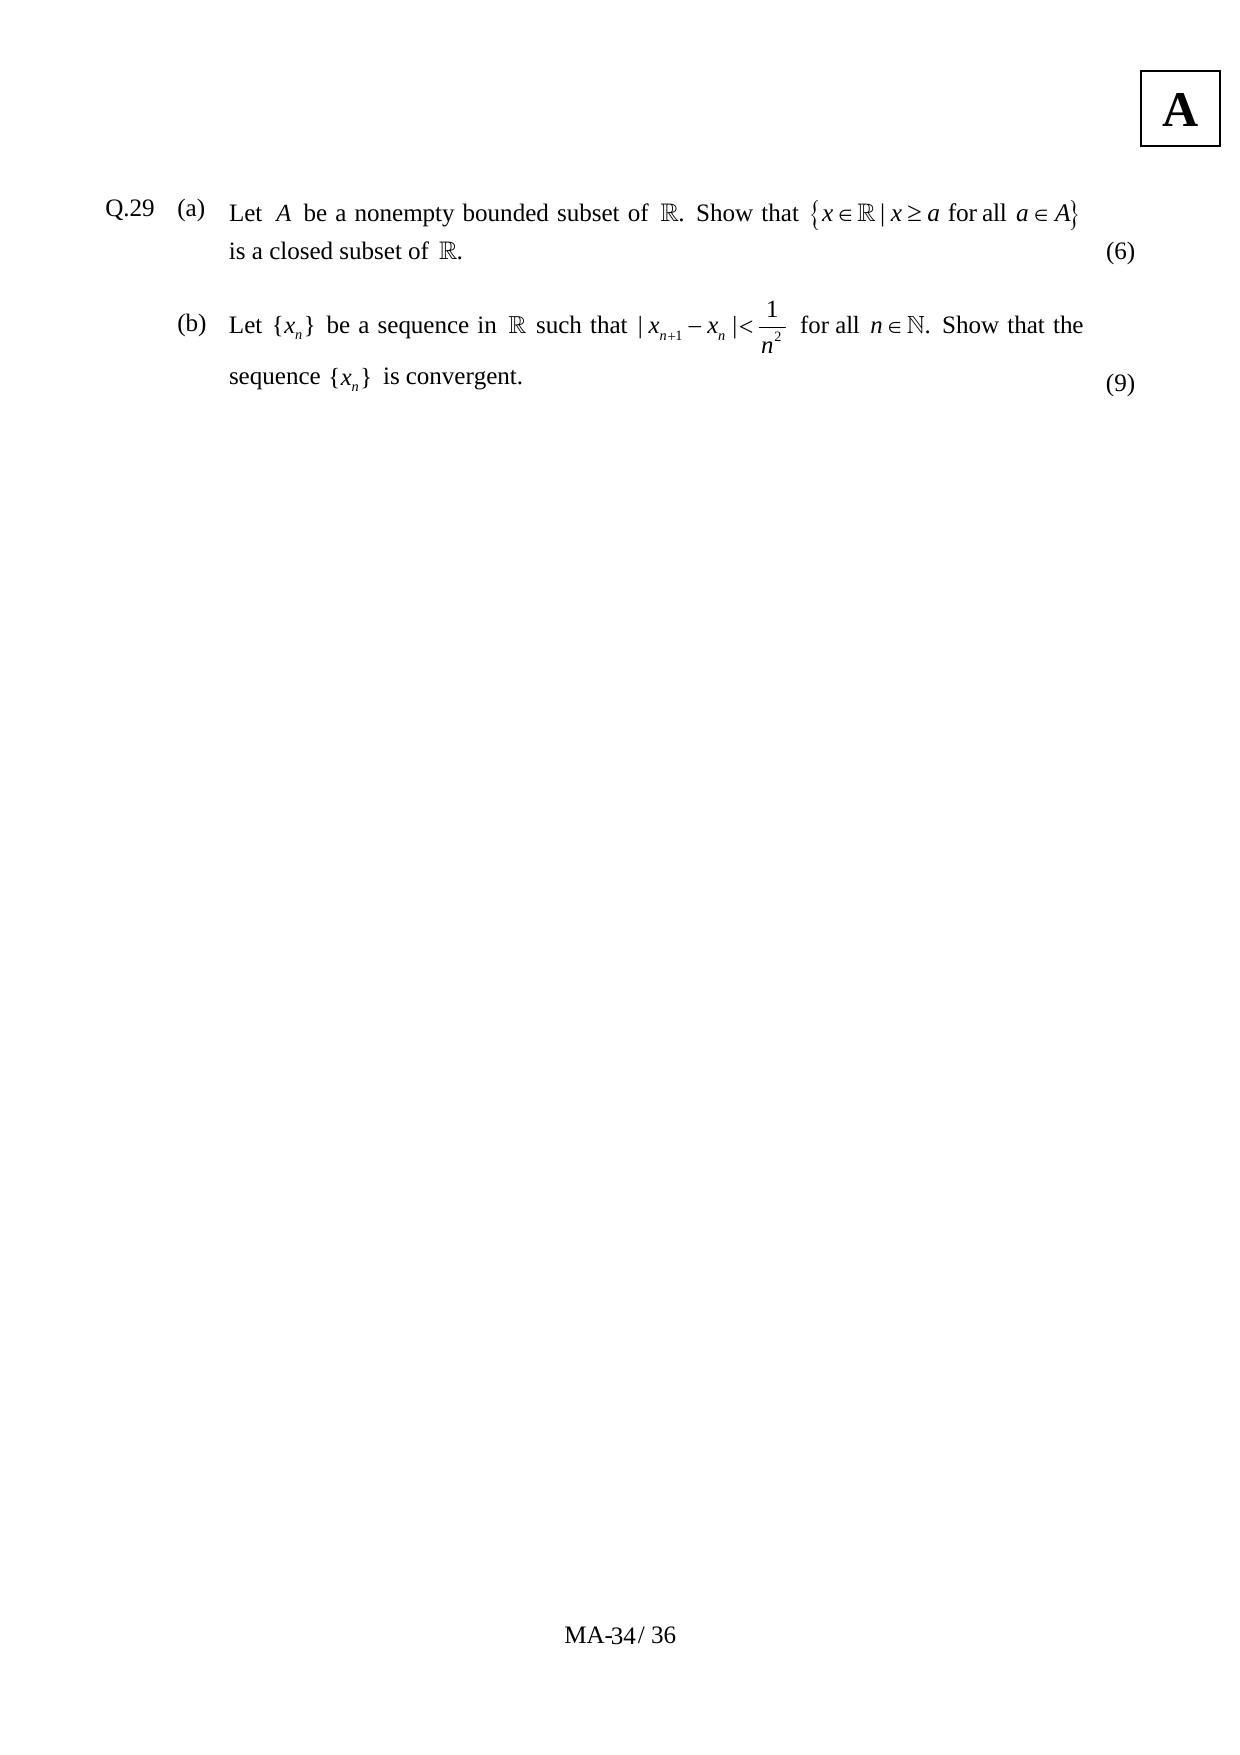 JAM 2012: MA Question Paper - Page 36